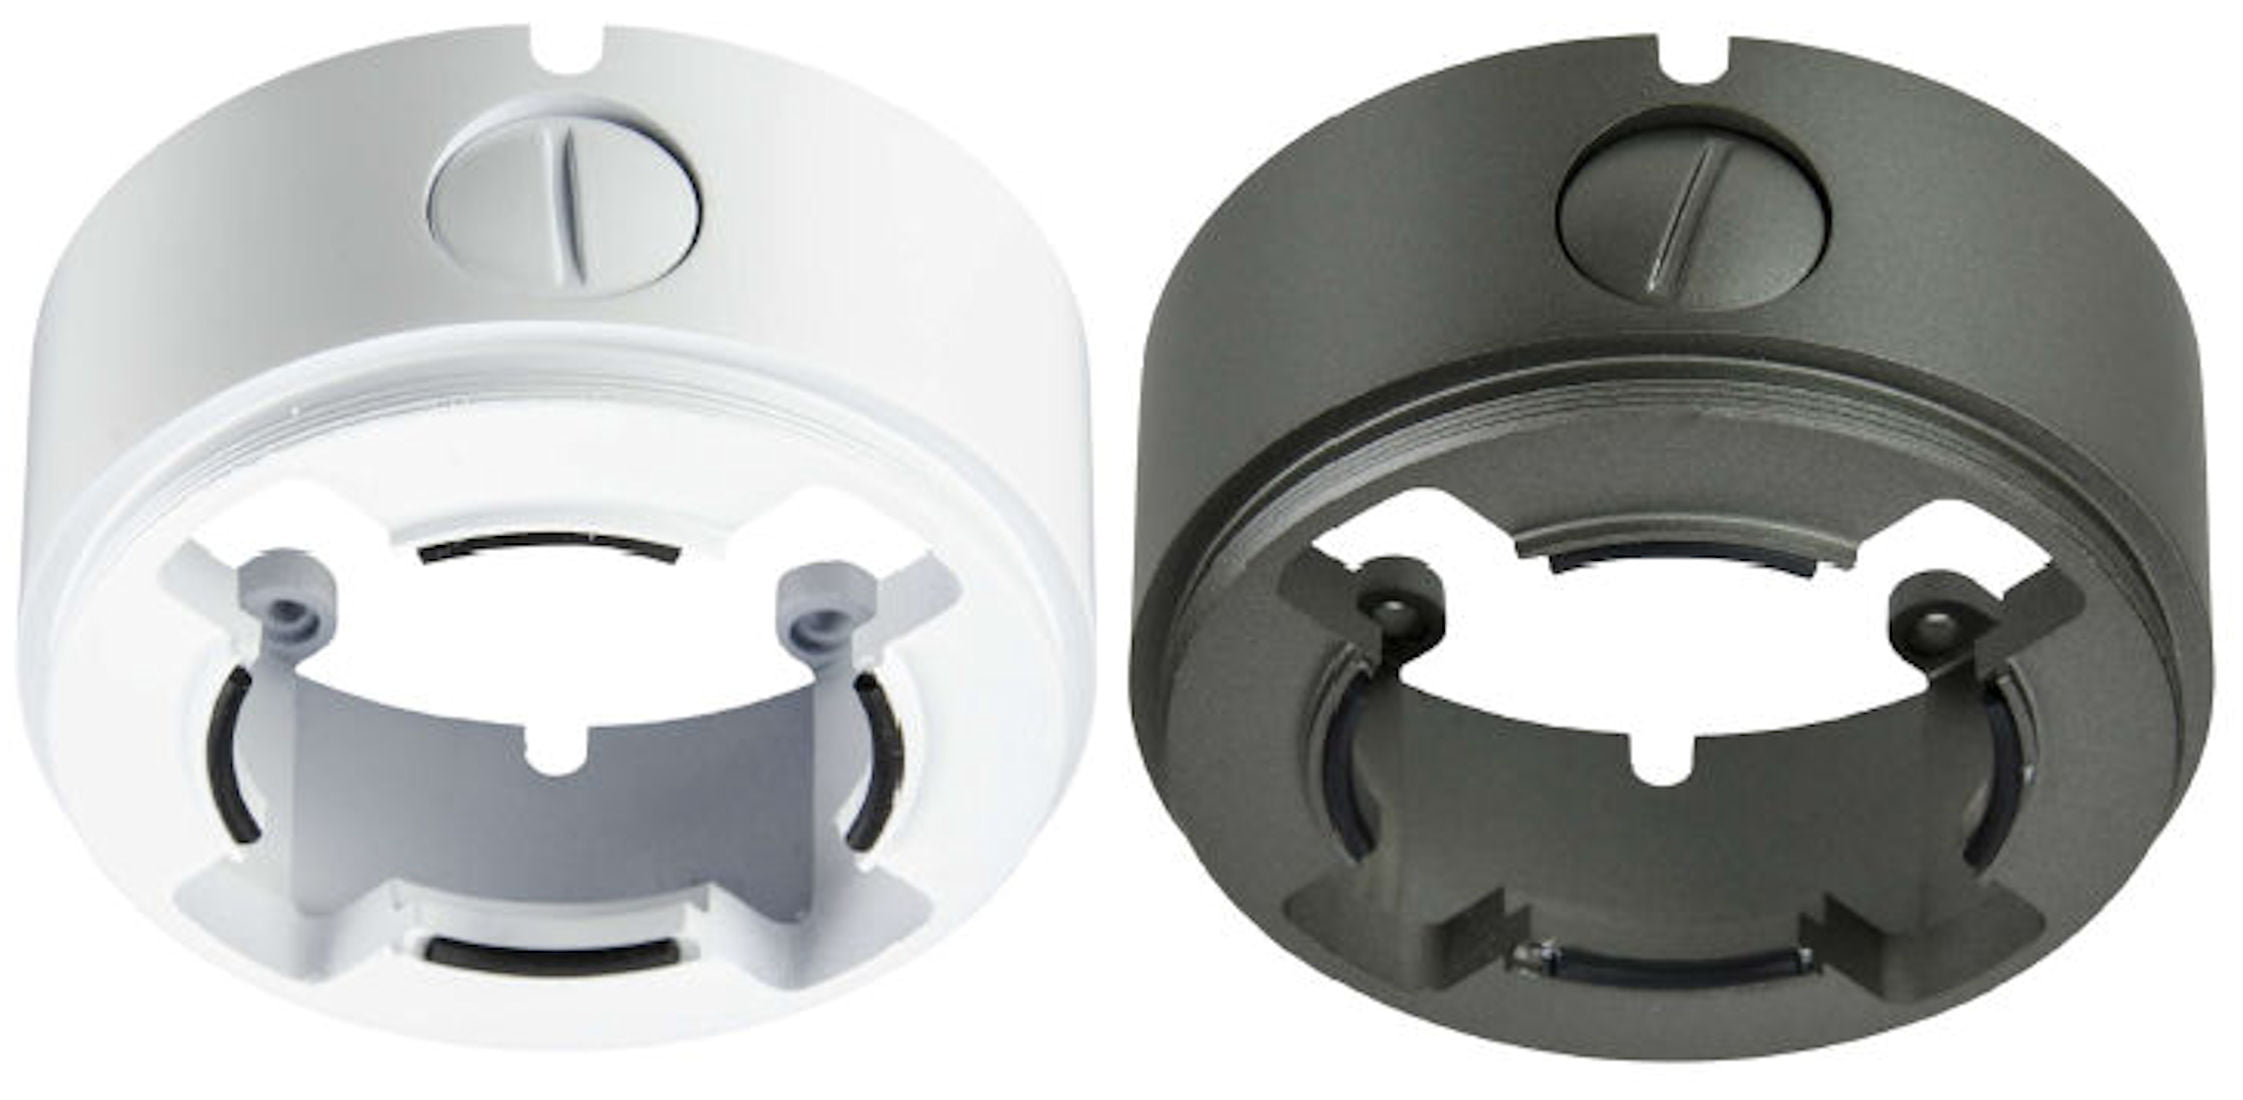 Eyemax IBA-BS Eyeball Small Dome Mount for Fixed Lens Models